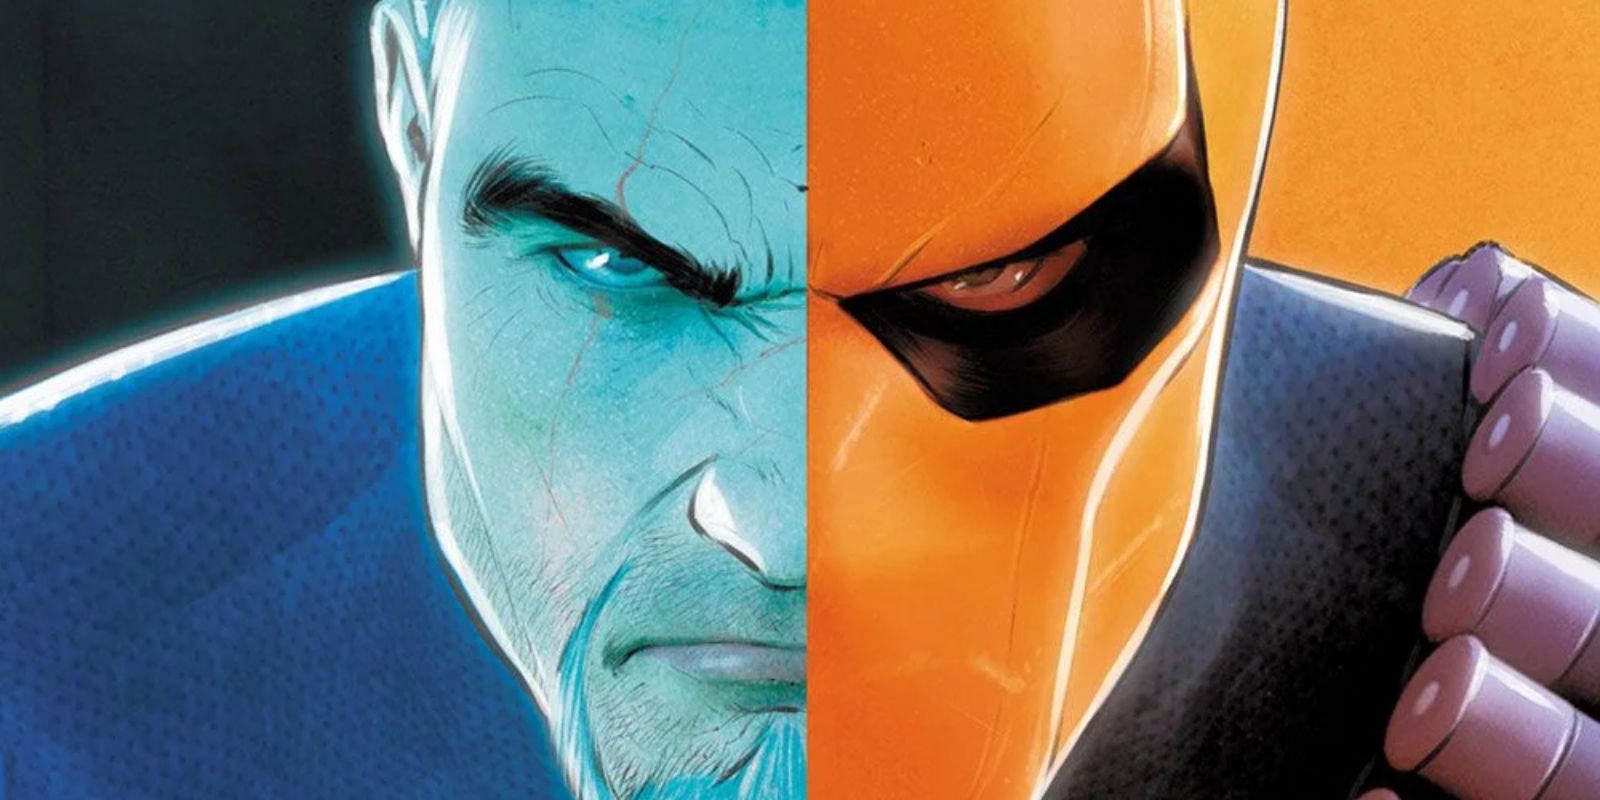 Deathstroke's mask gets a possible explanation.